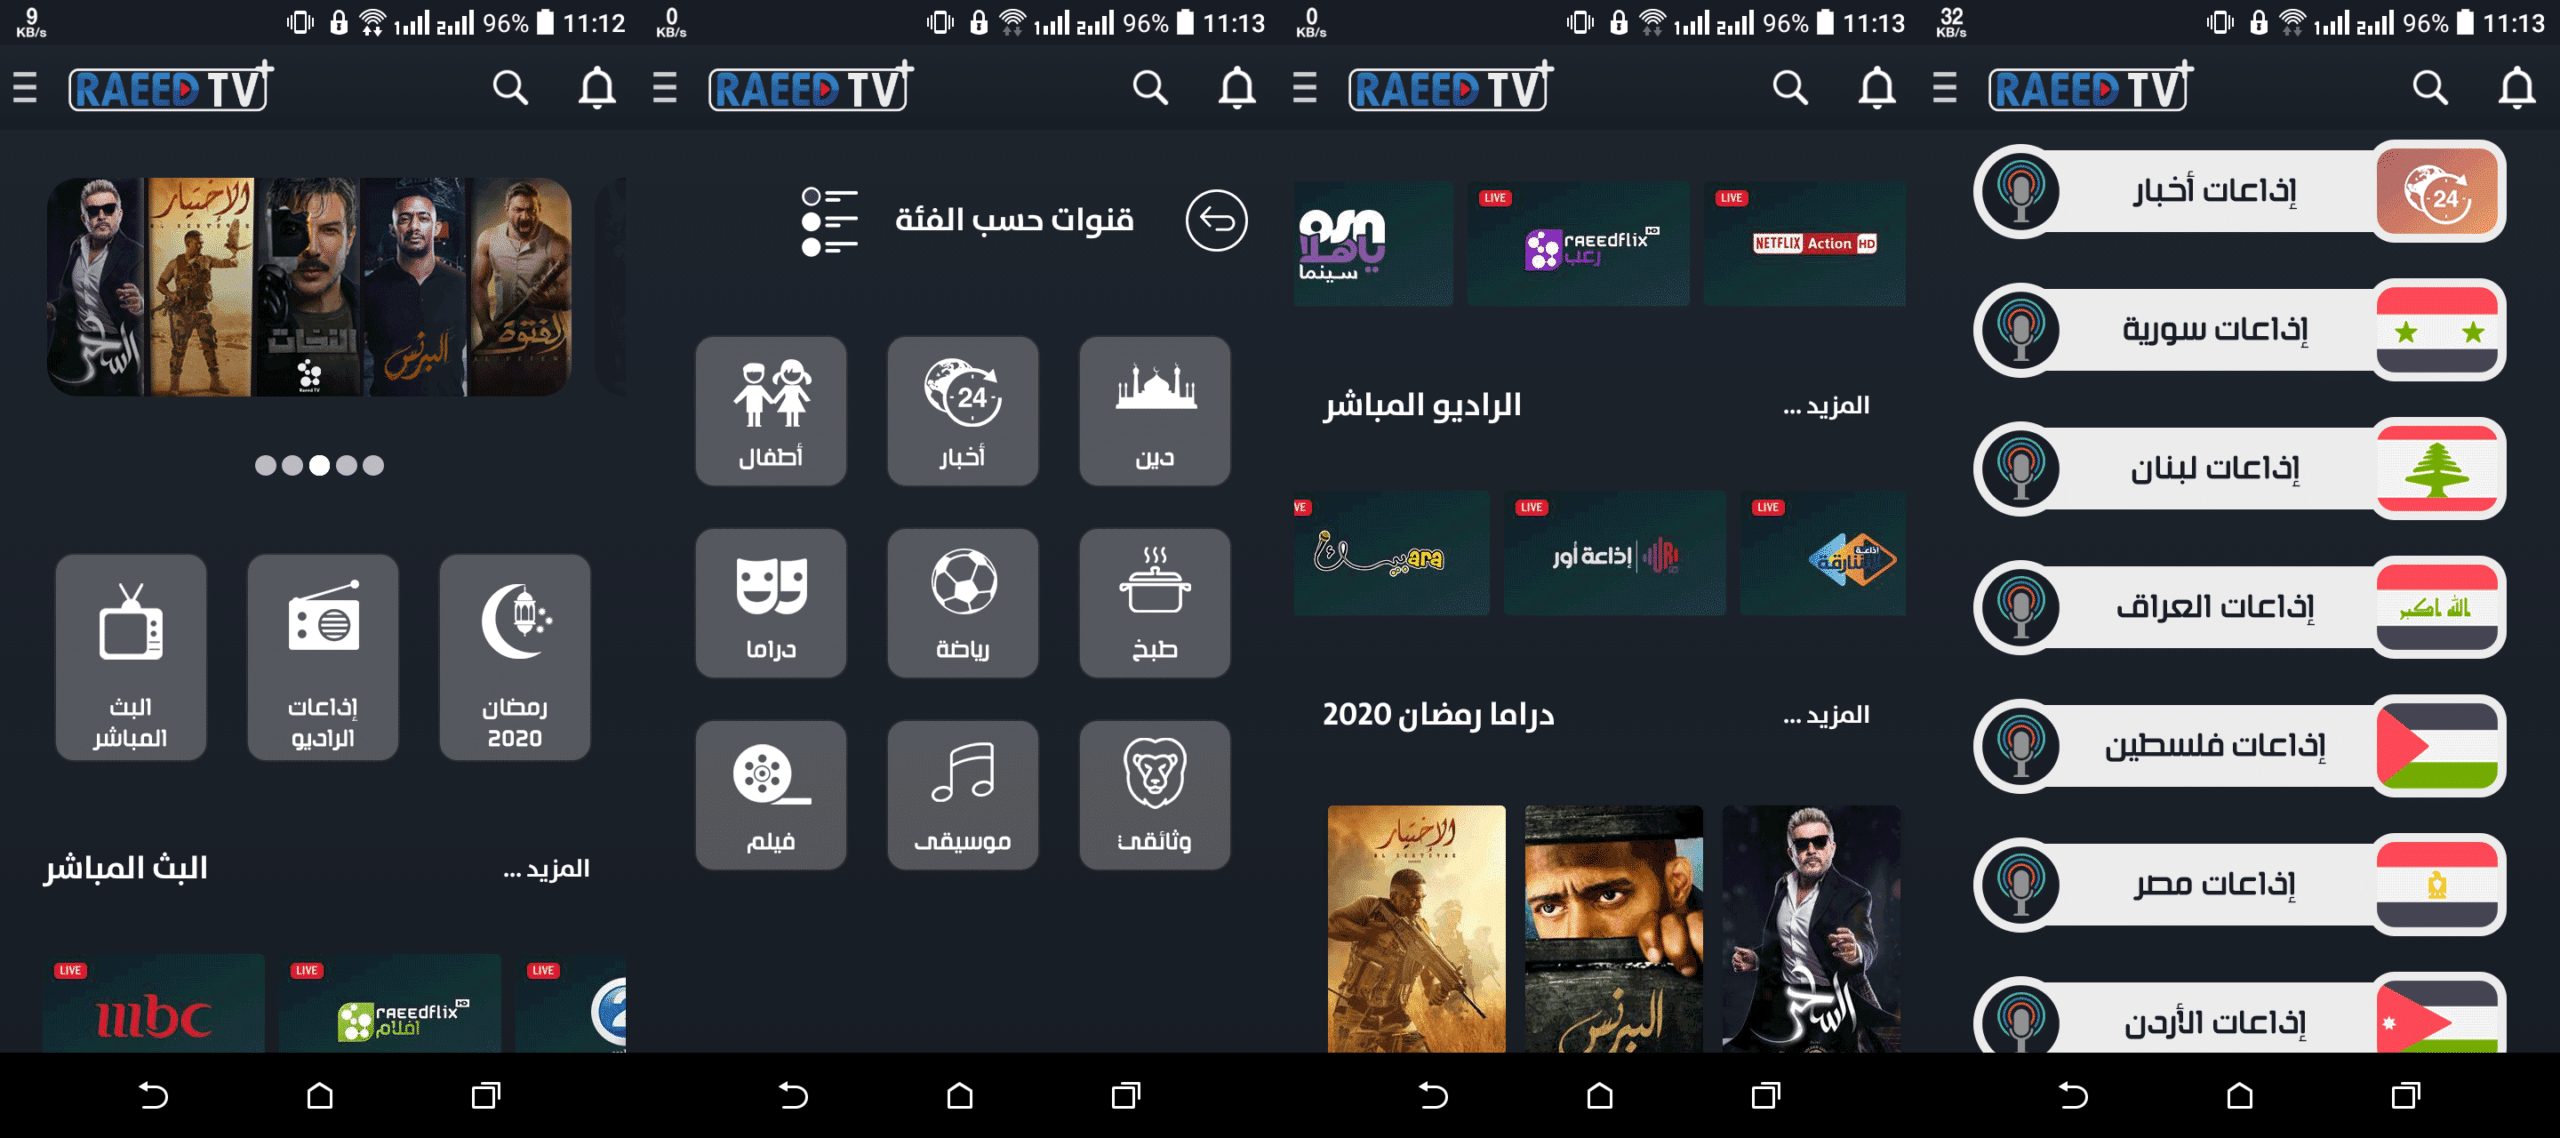 Raeed tv for Android Latest